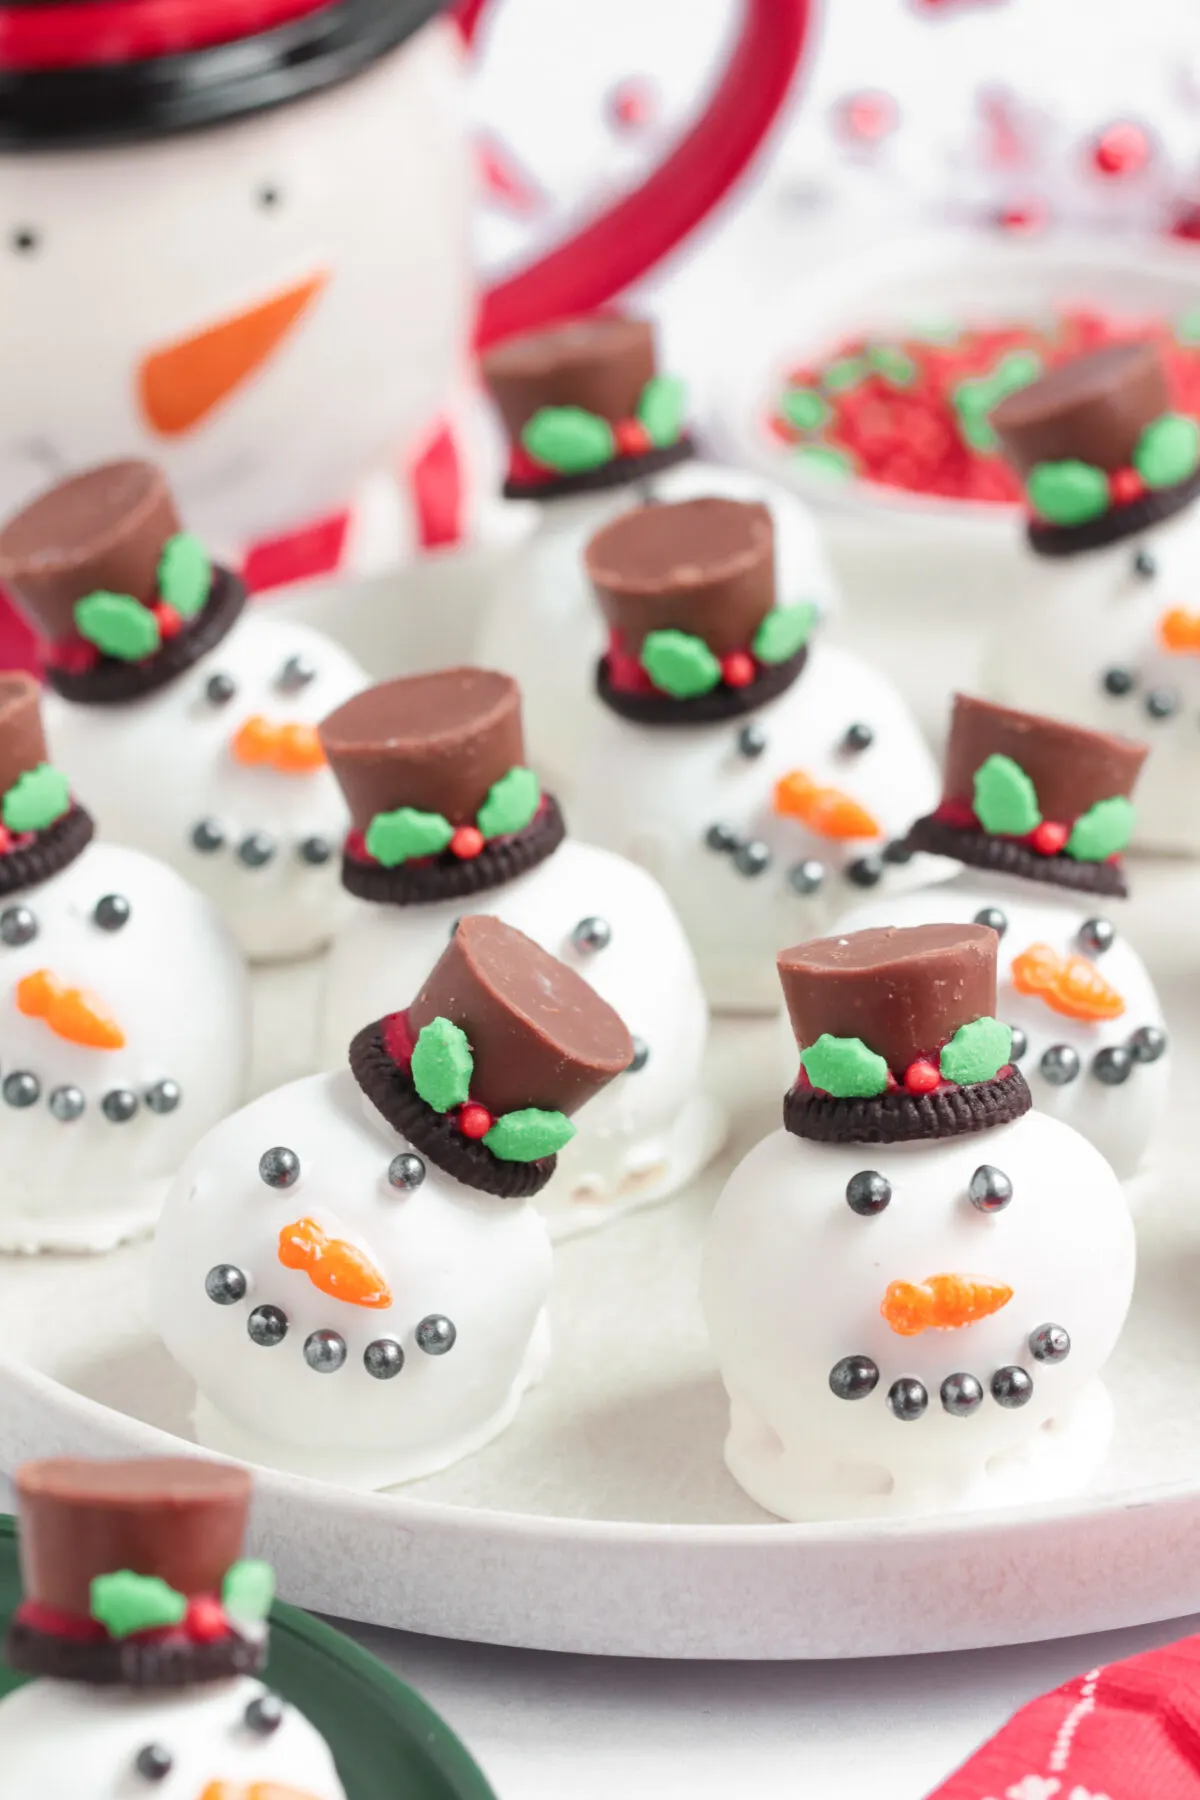 Get into the holiday spirit with these delicious and fun snowman Oreo balls. They’re sure to add cheer to your festive spread this season.